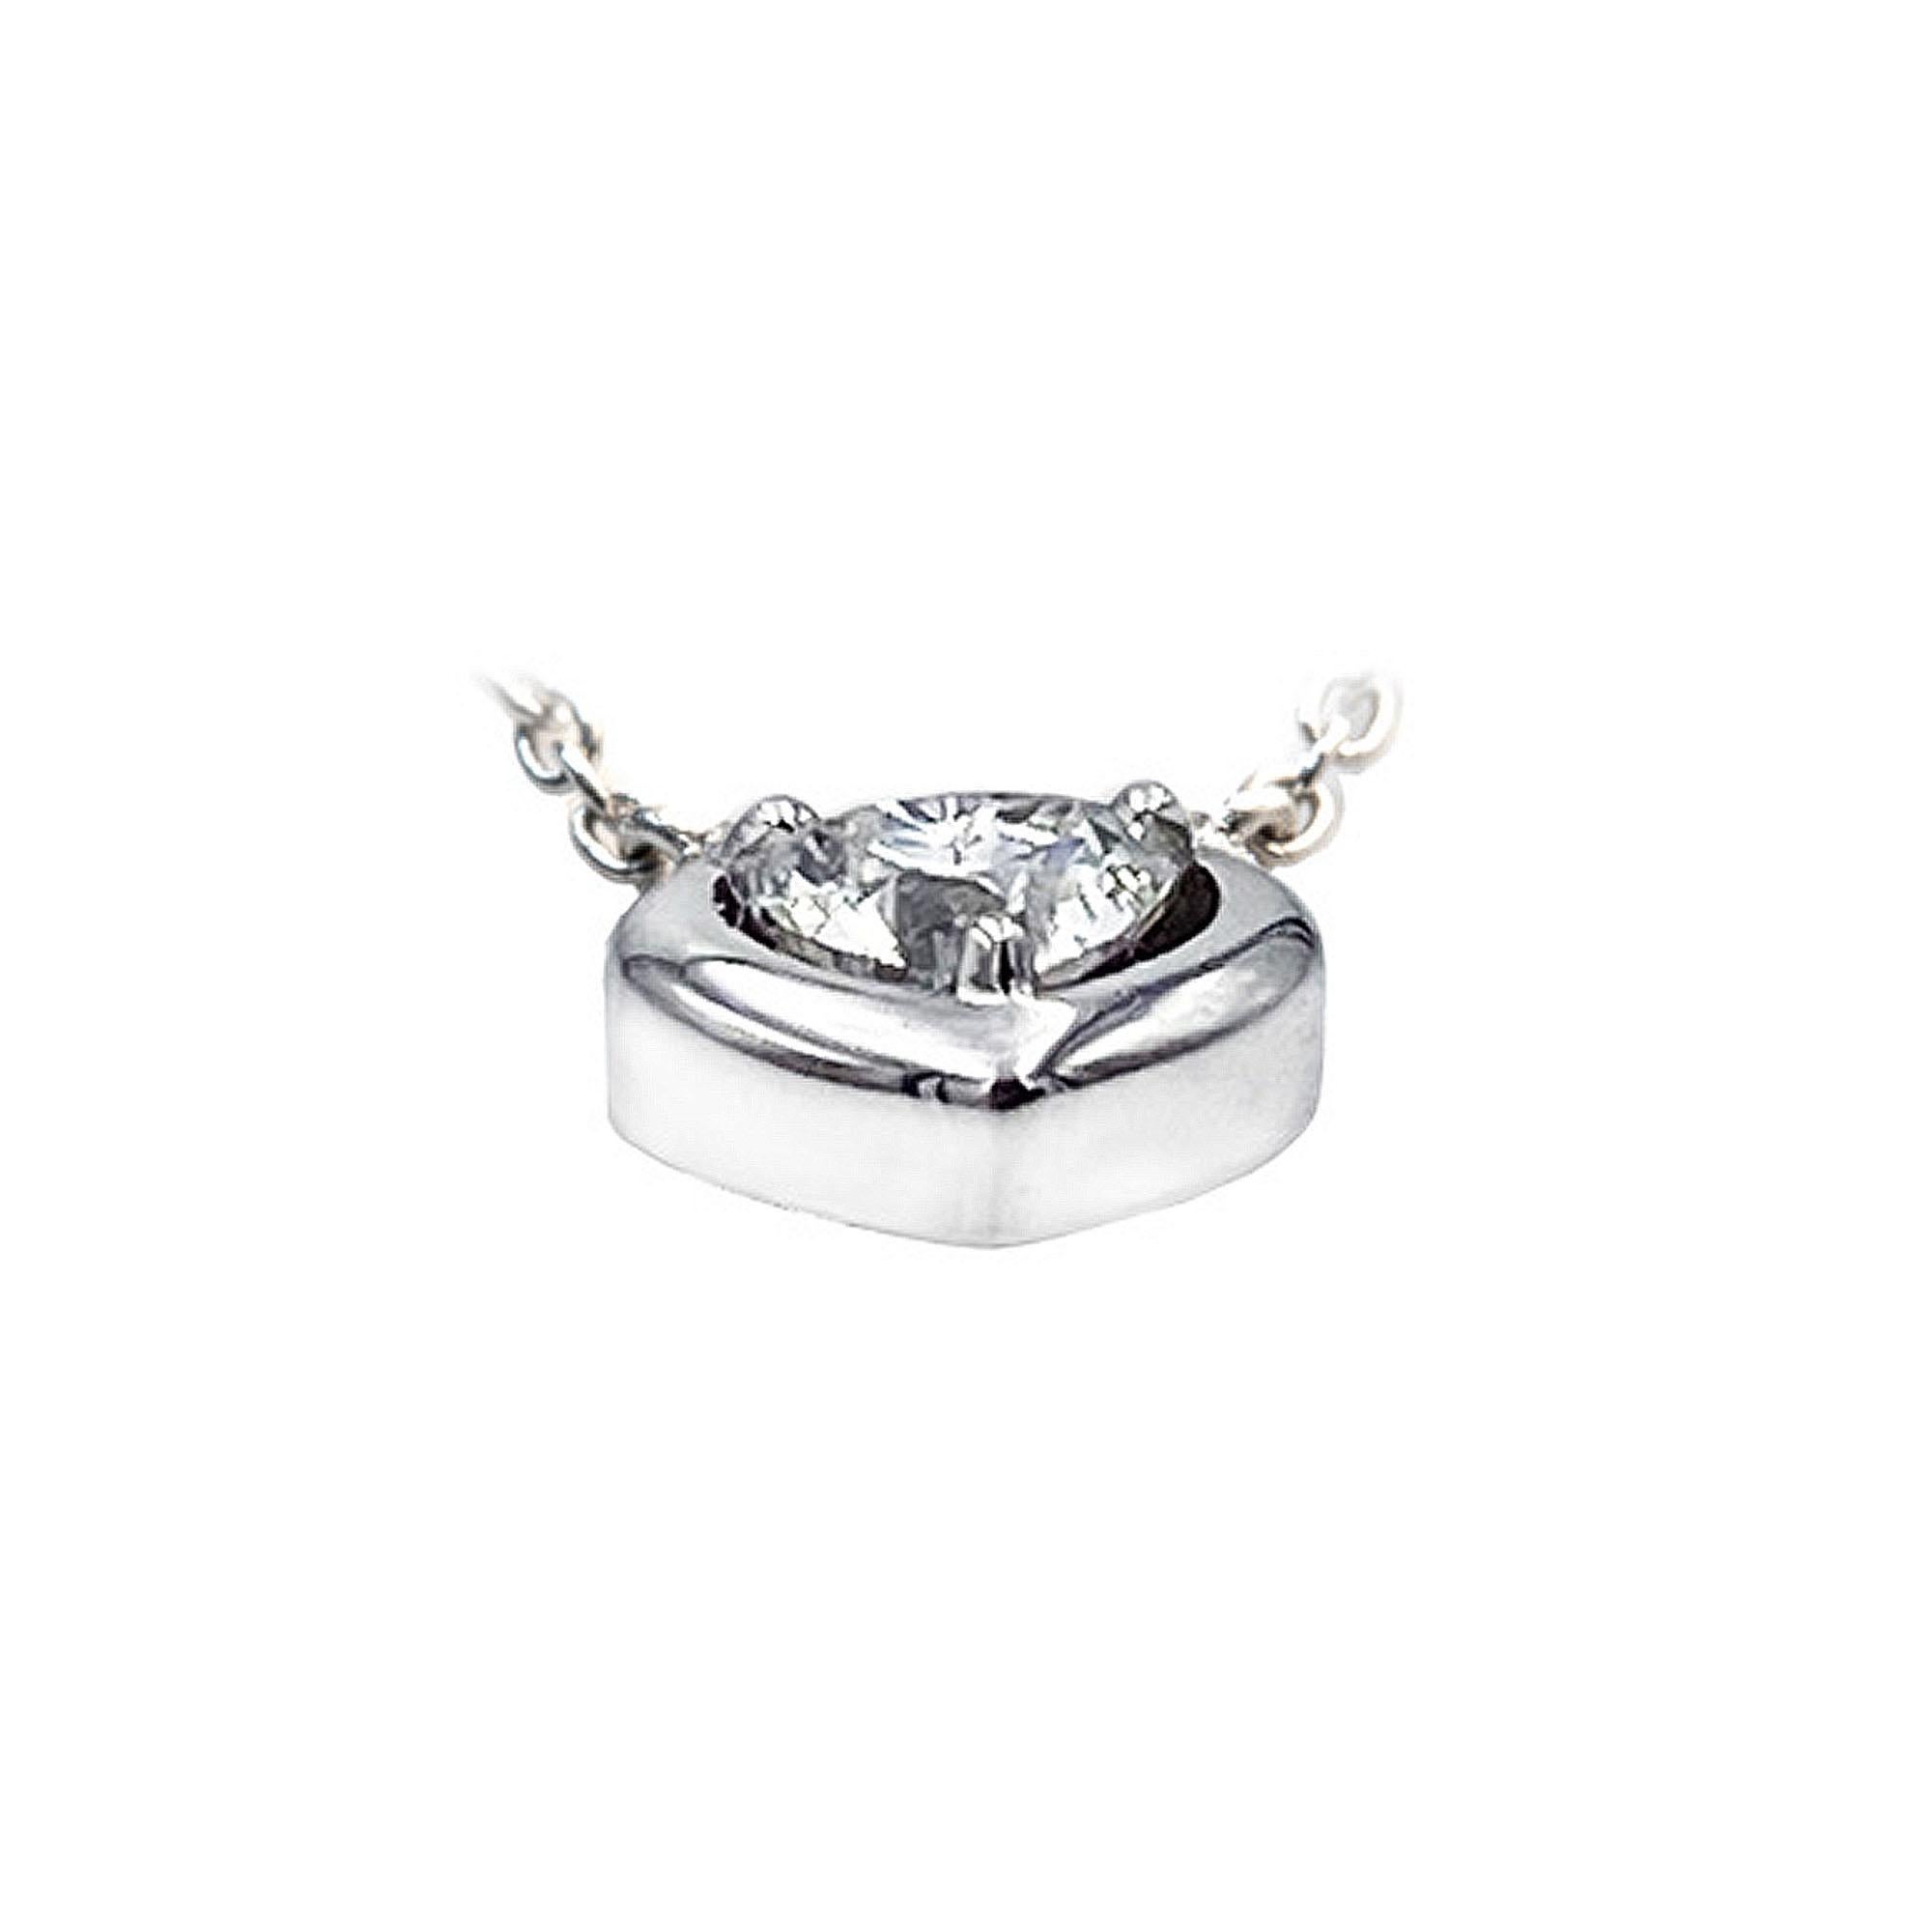 This enchanting pendant features a dazzling 0.30-carat heart-shaped diamond, renowned for its romantic symbolism and timeless elegance. Graced with an E-F color grade, the diamond exhibits near-colorless tones, enhancing its overall brilliance. With